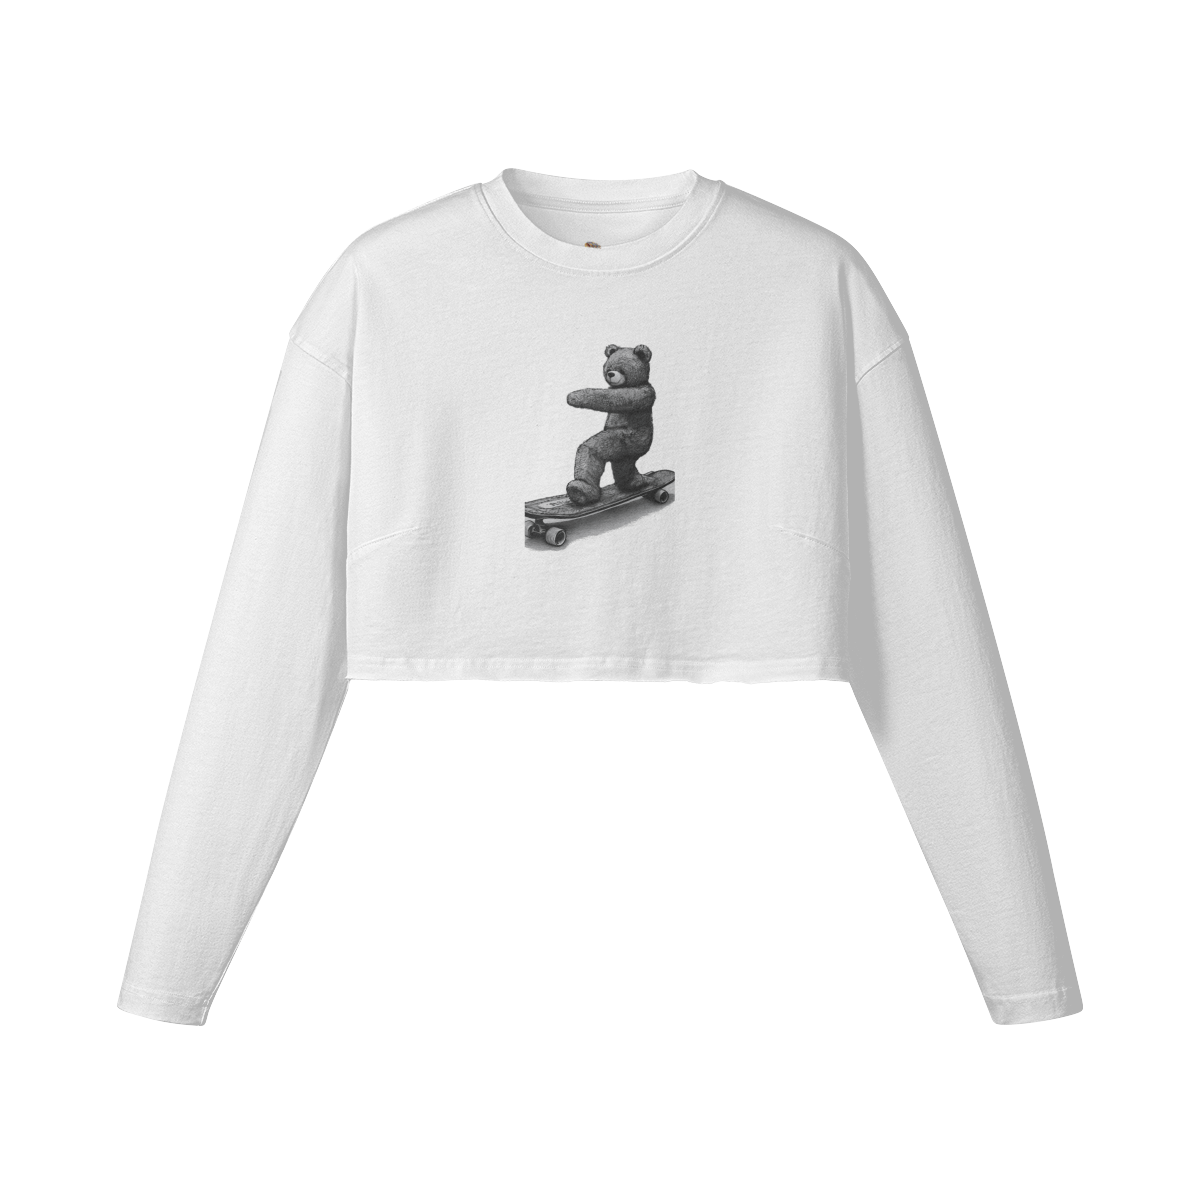 White - Teddy Ride Shred 260GSM Women's Raw Hem Long Sleeve Crop Top - womens crop top at TFC&H Co.